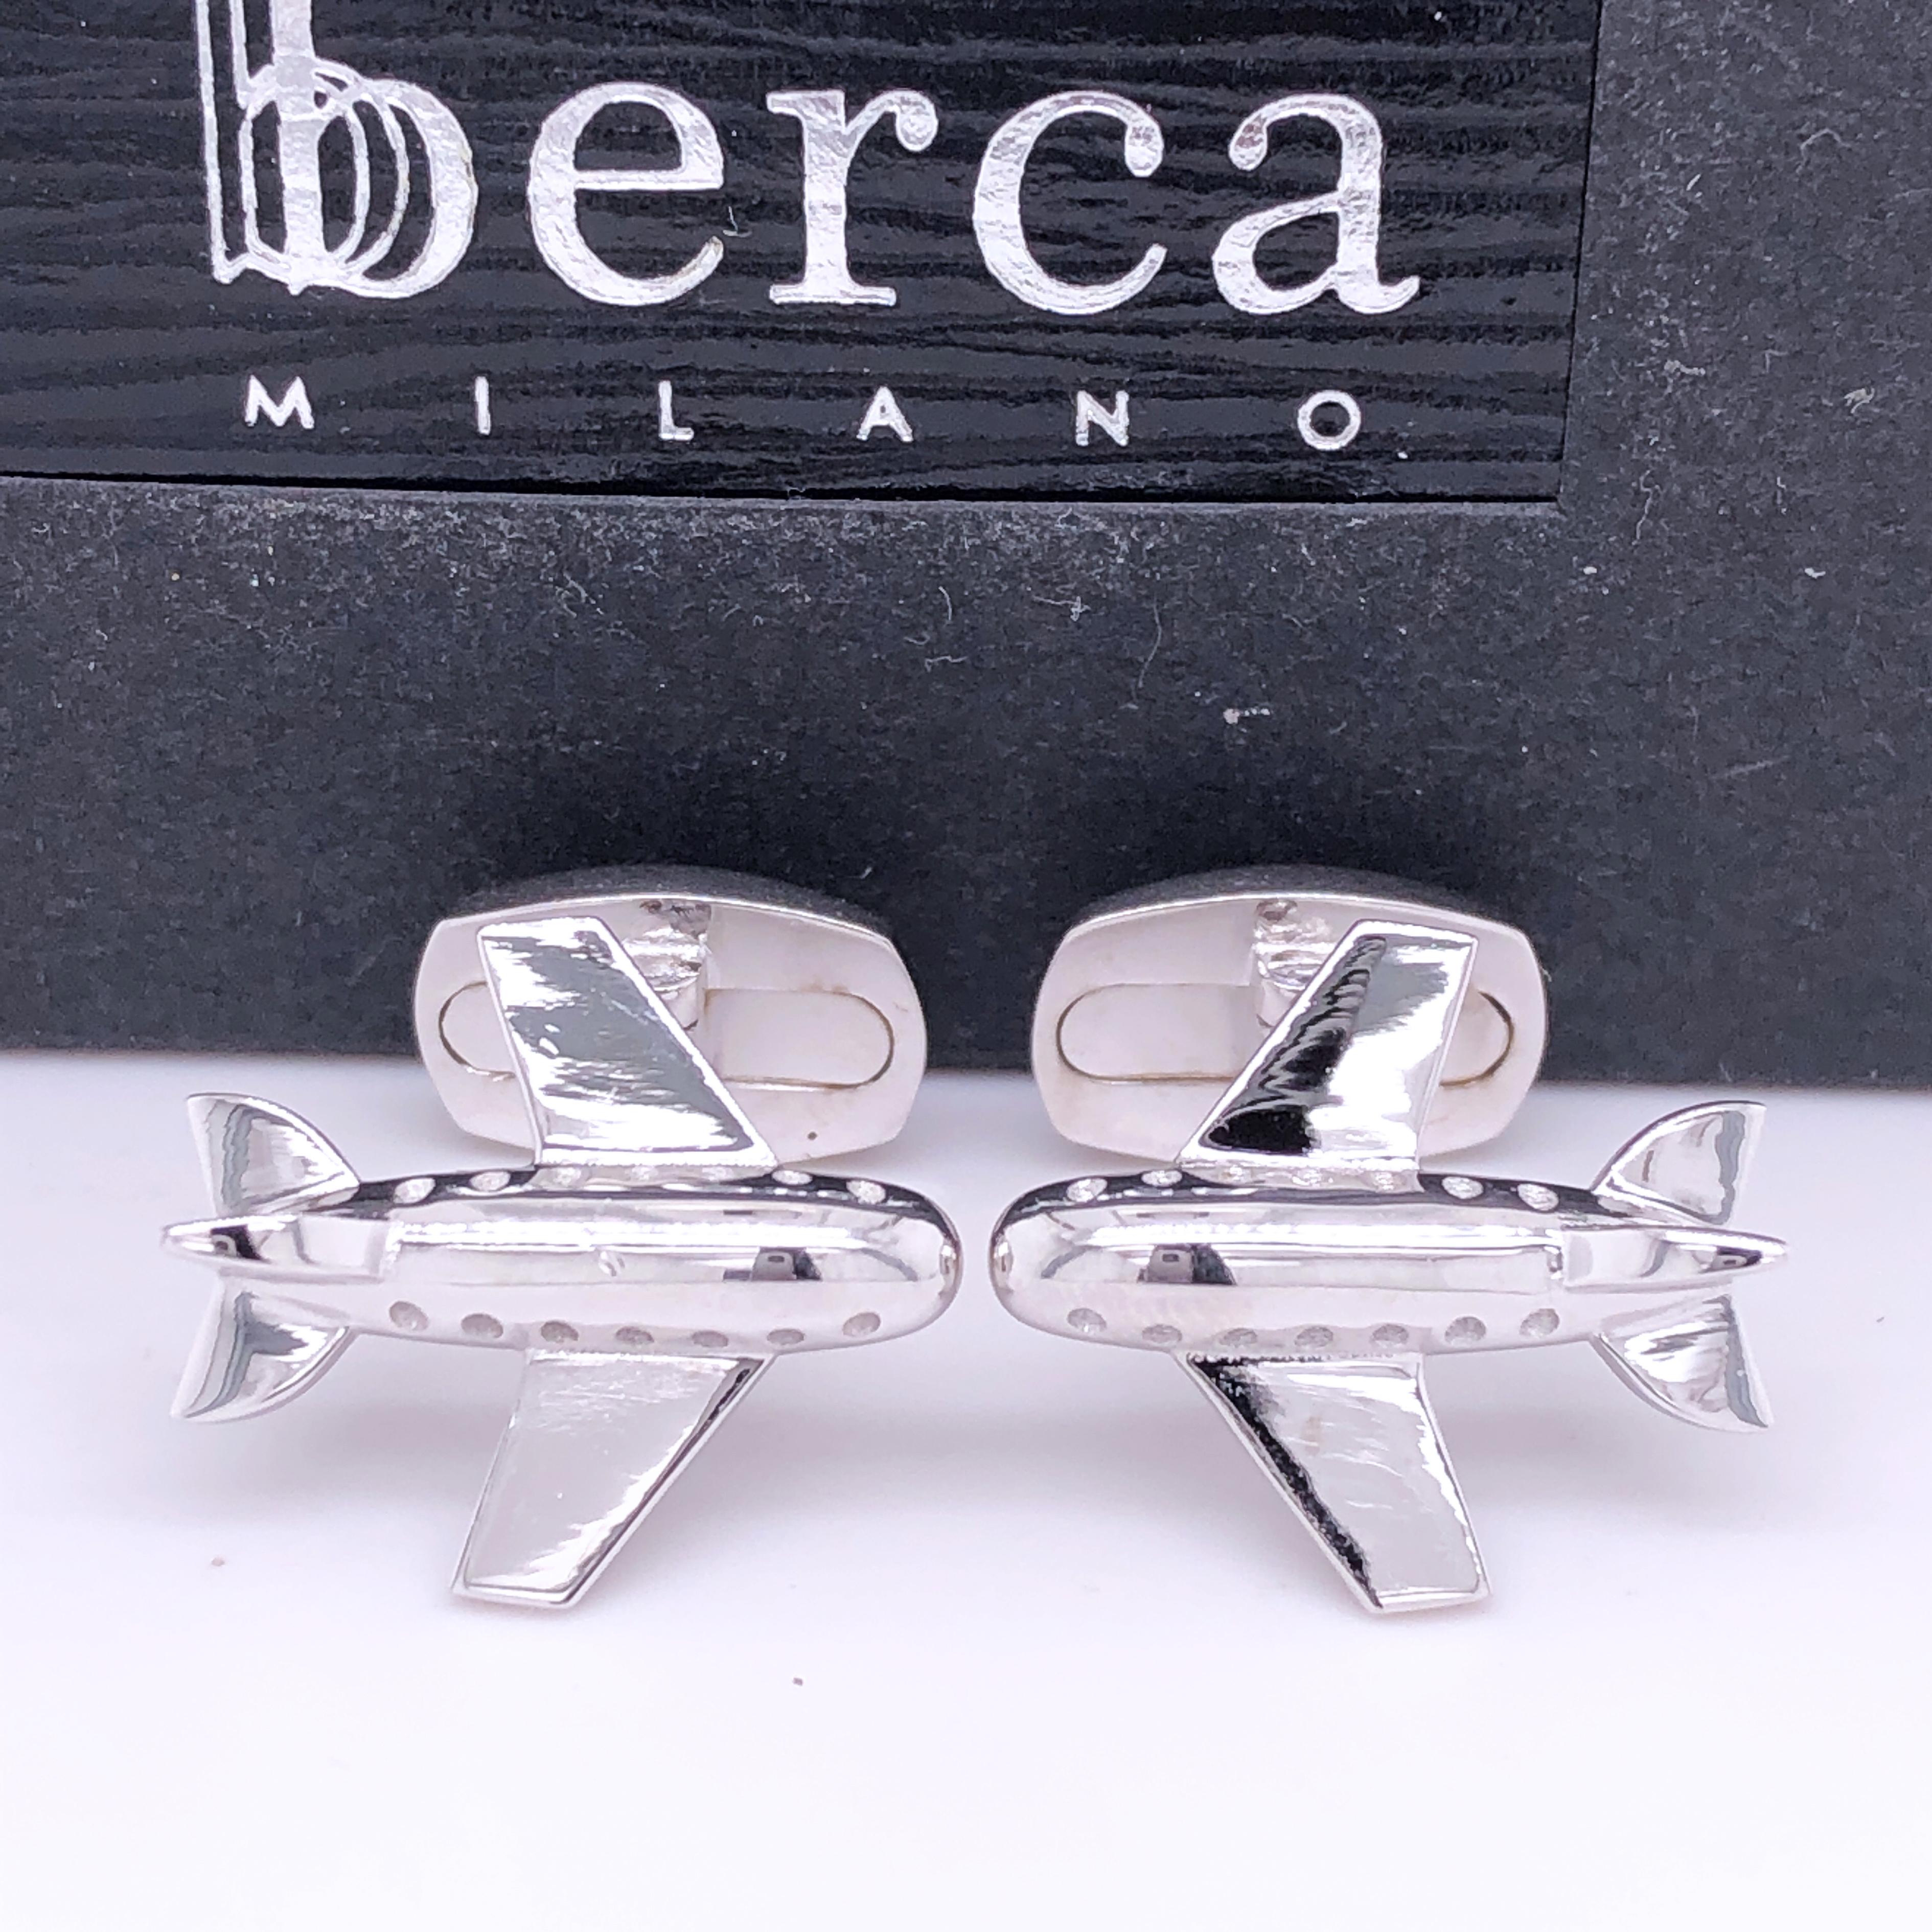 Unique, Absolutely Chic, Hand Crafted by our expert Silversmiths, Airplane Shaped Solid Sterling Silver Cufflinks.

In our Smart Tobacco Suede Leather Case and Pouch.
